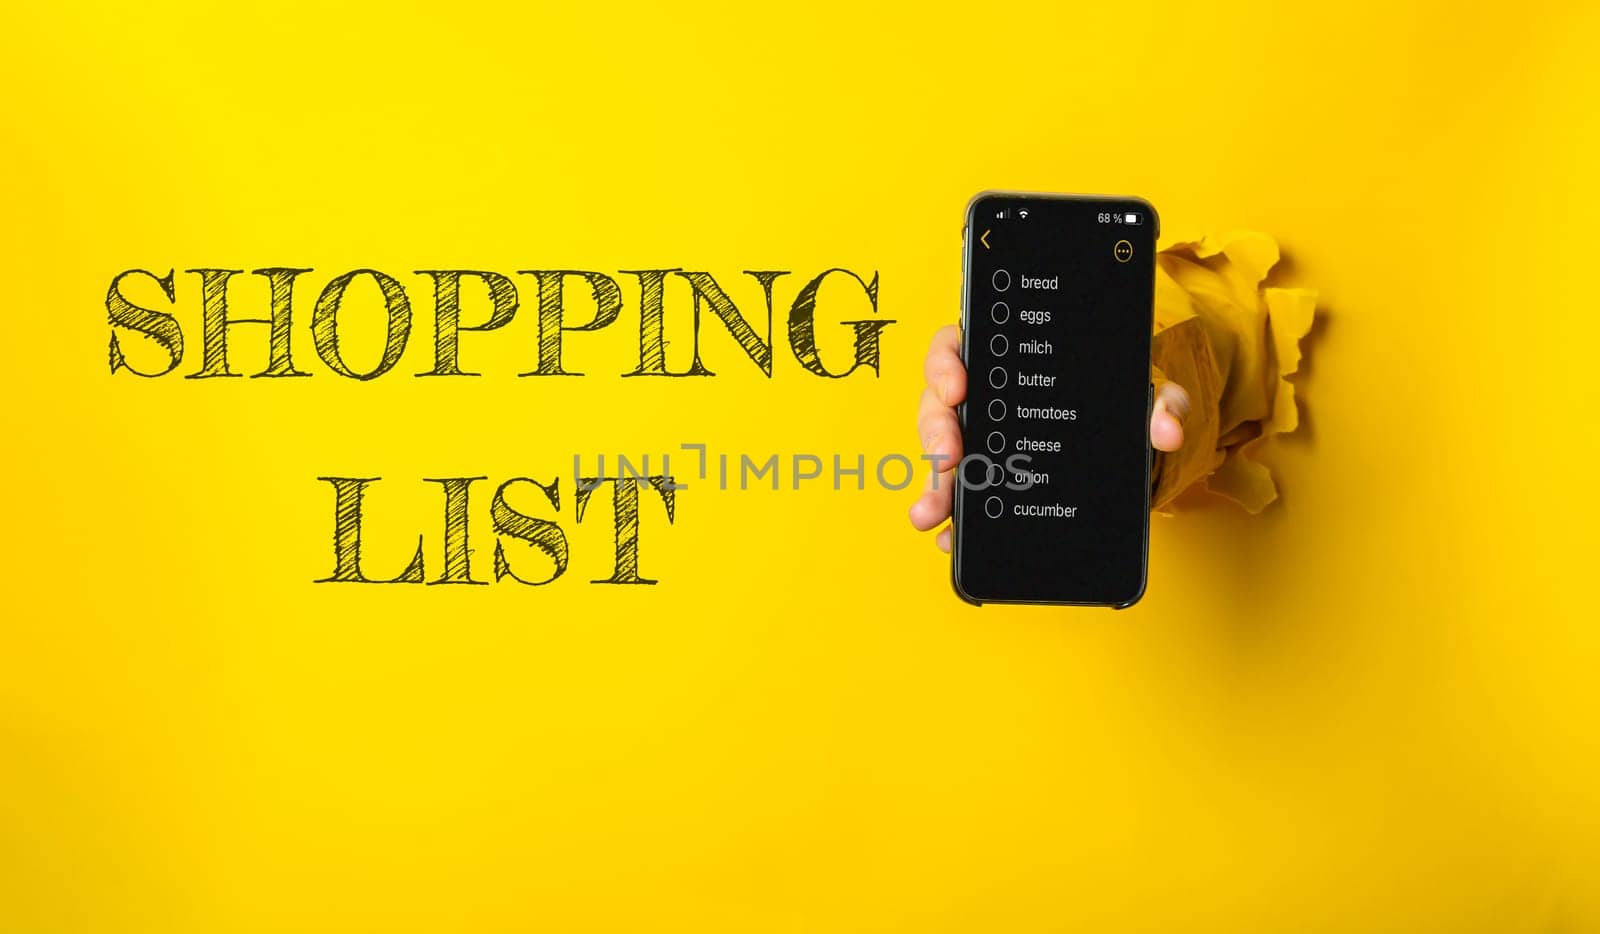 A person holds a cell phone displaying a shopping list, reflecting modern convenience and digital organization for everyday tasks like grocery shopping.